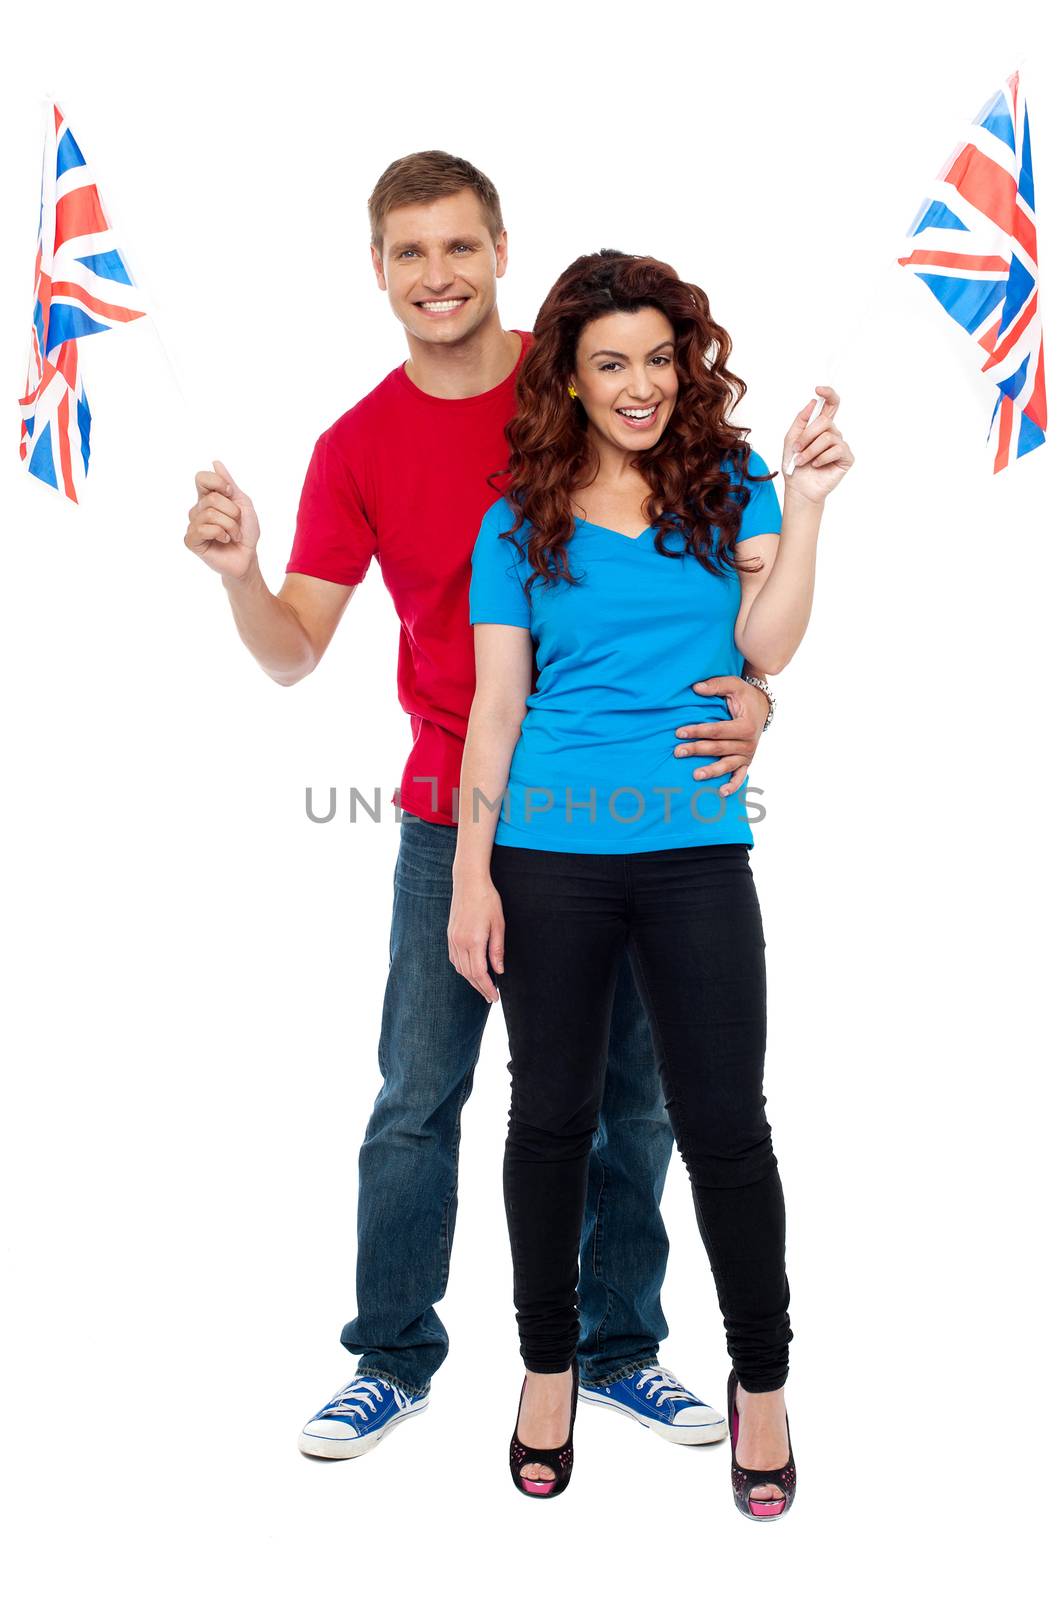 Cheerful UK supporters posing together by stockyimages